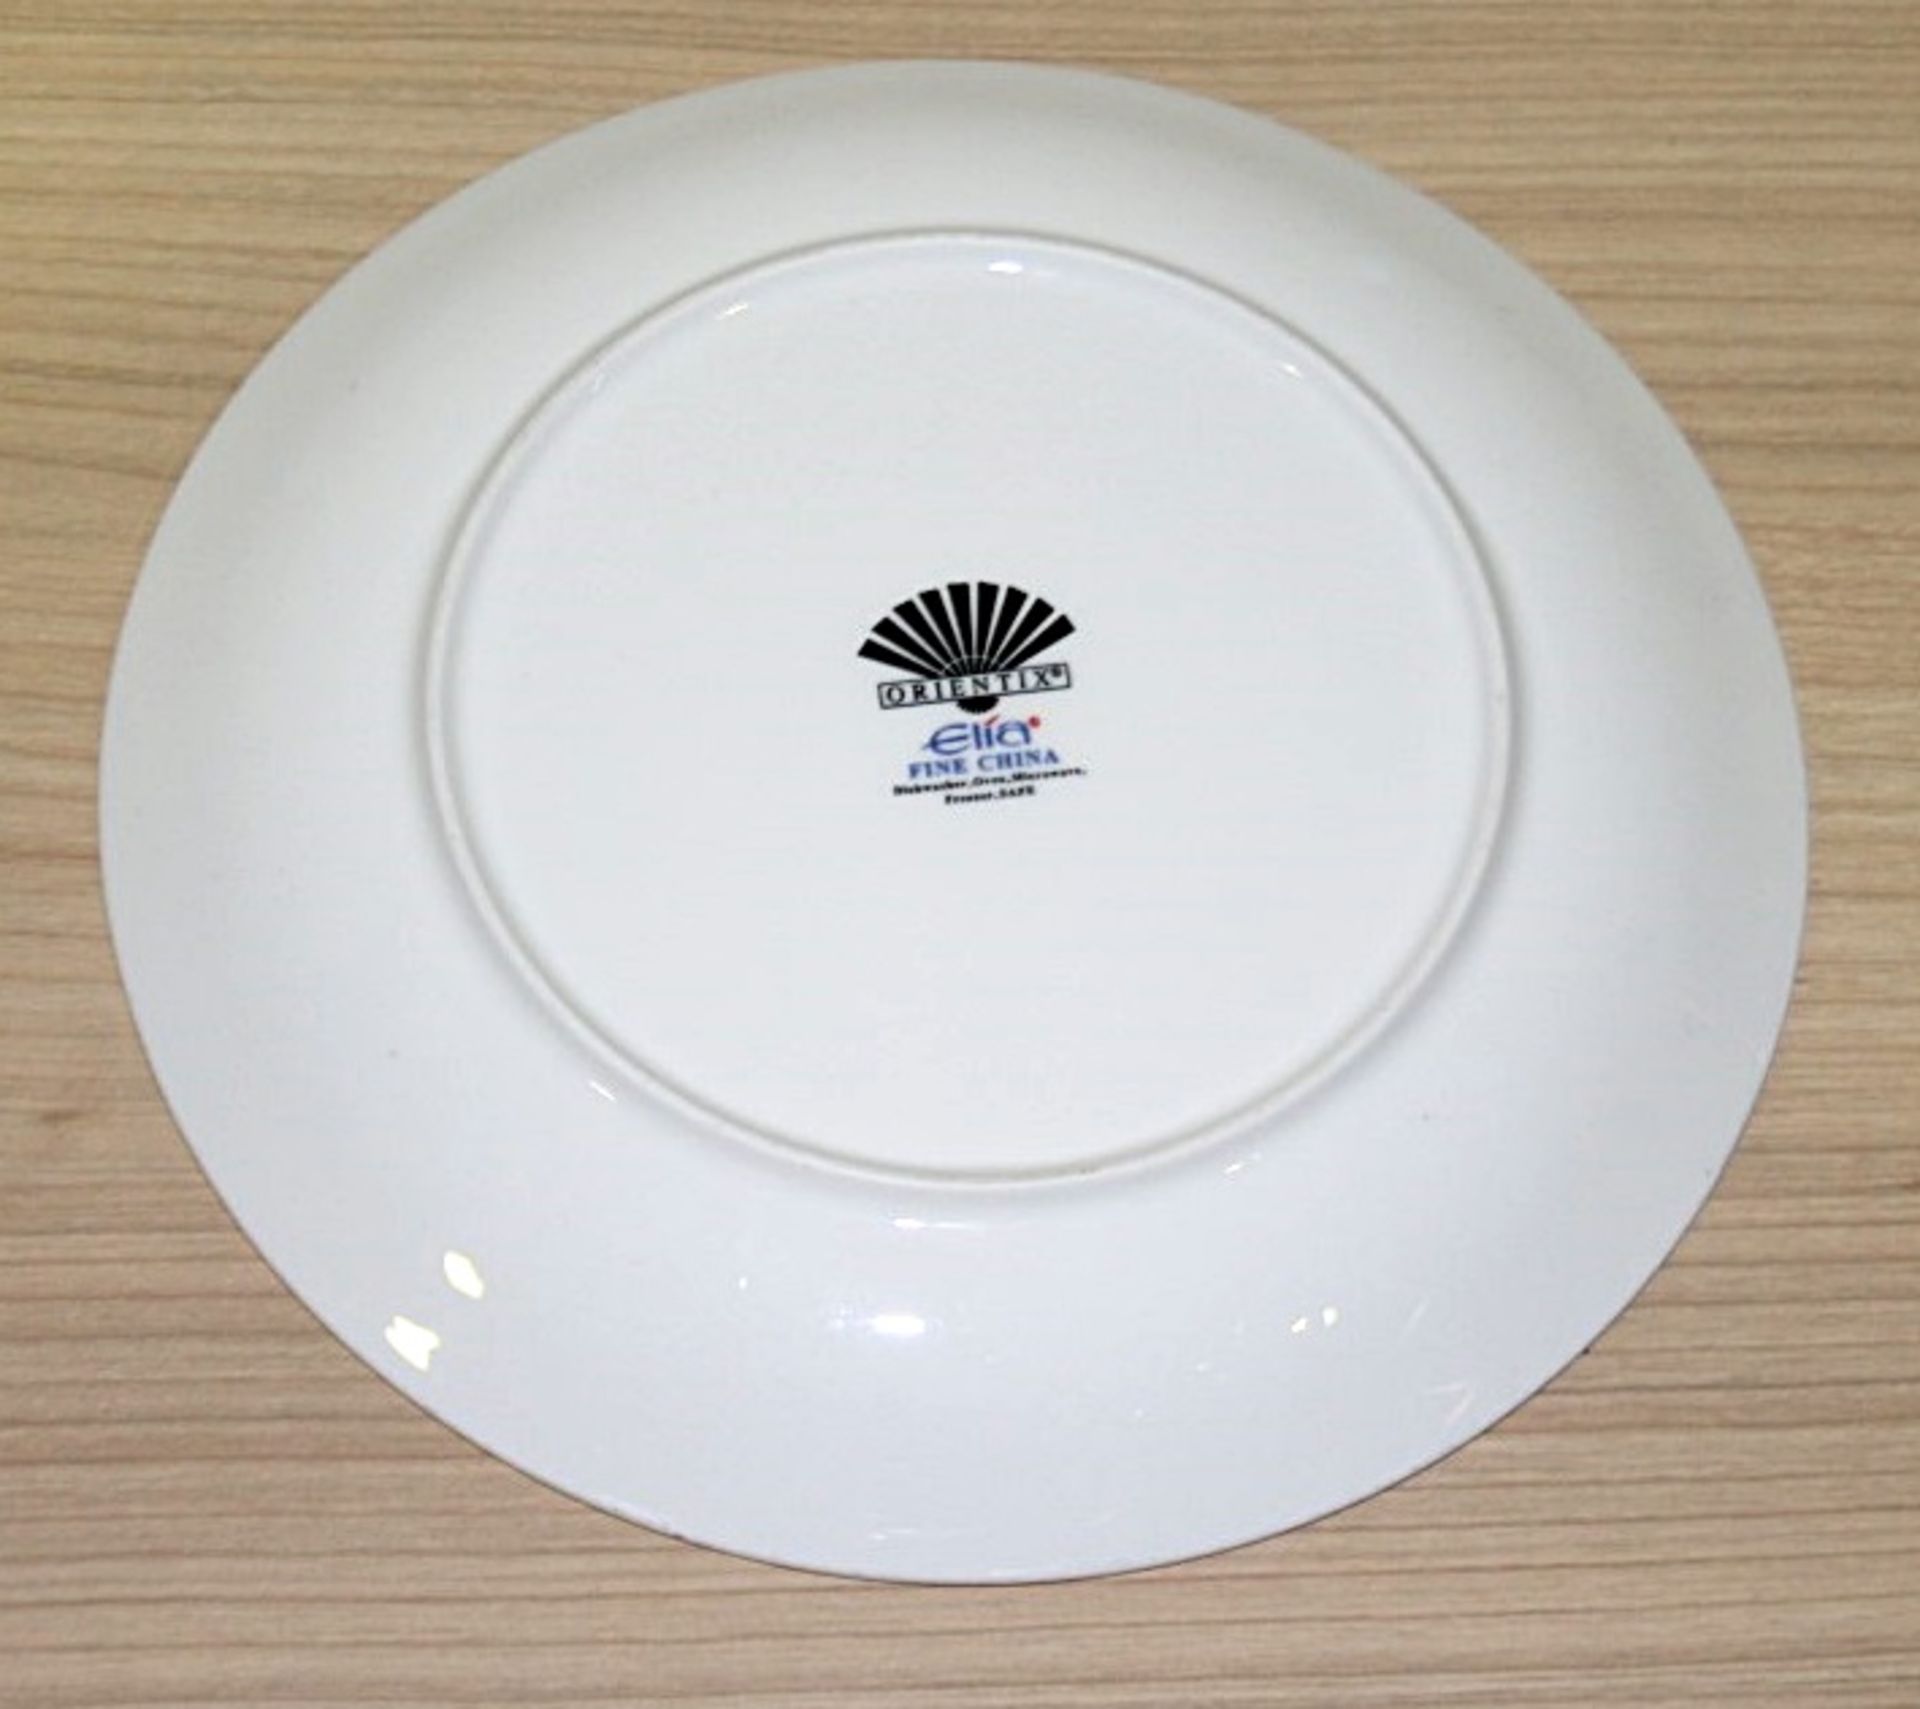 45 x Elia ORIENTIX Fine China Commercial Side / Starter Plates - 21.5cm In Diameter - Image 5 of 5